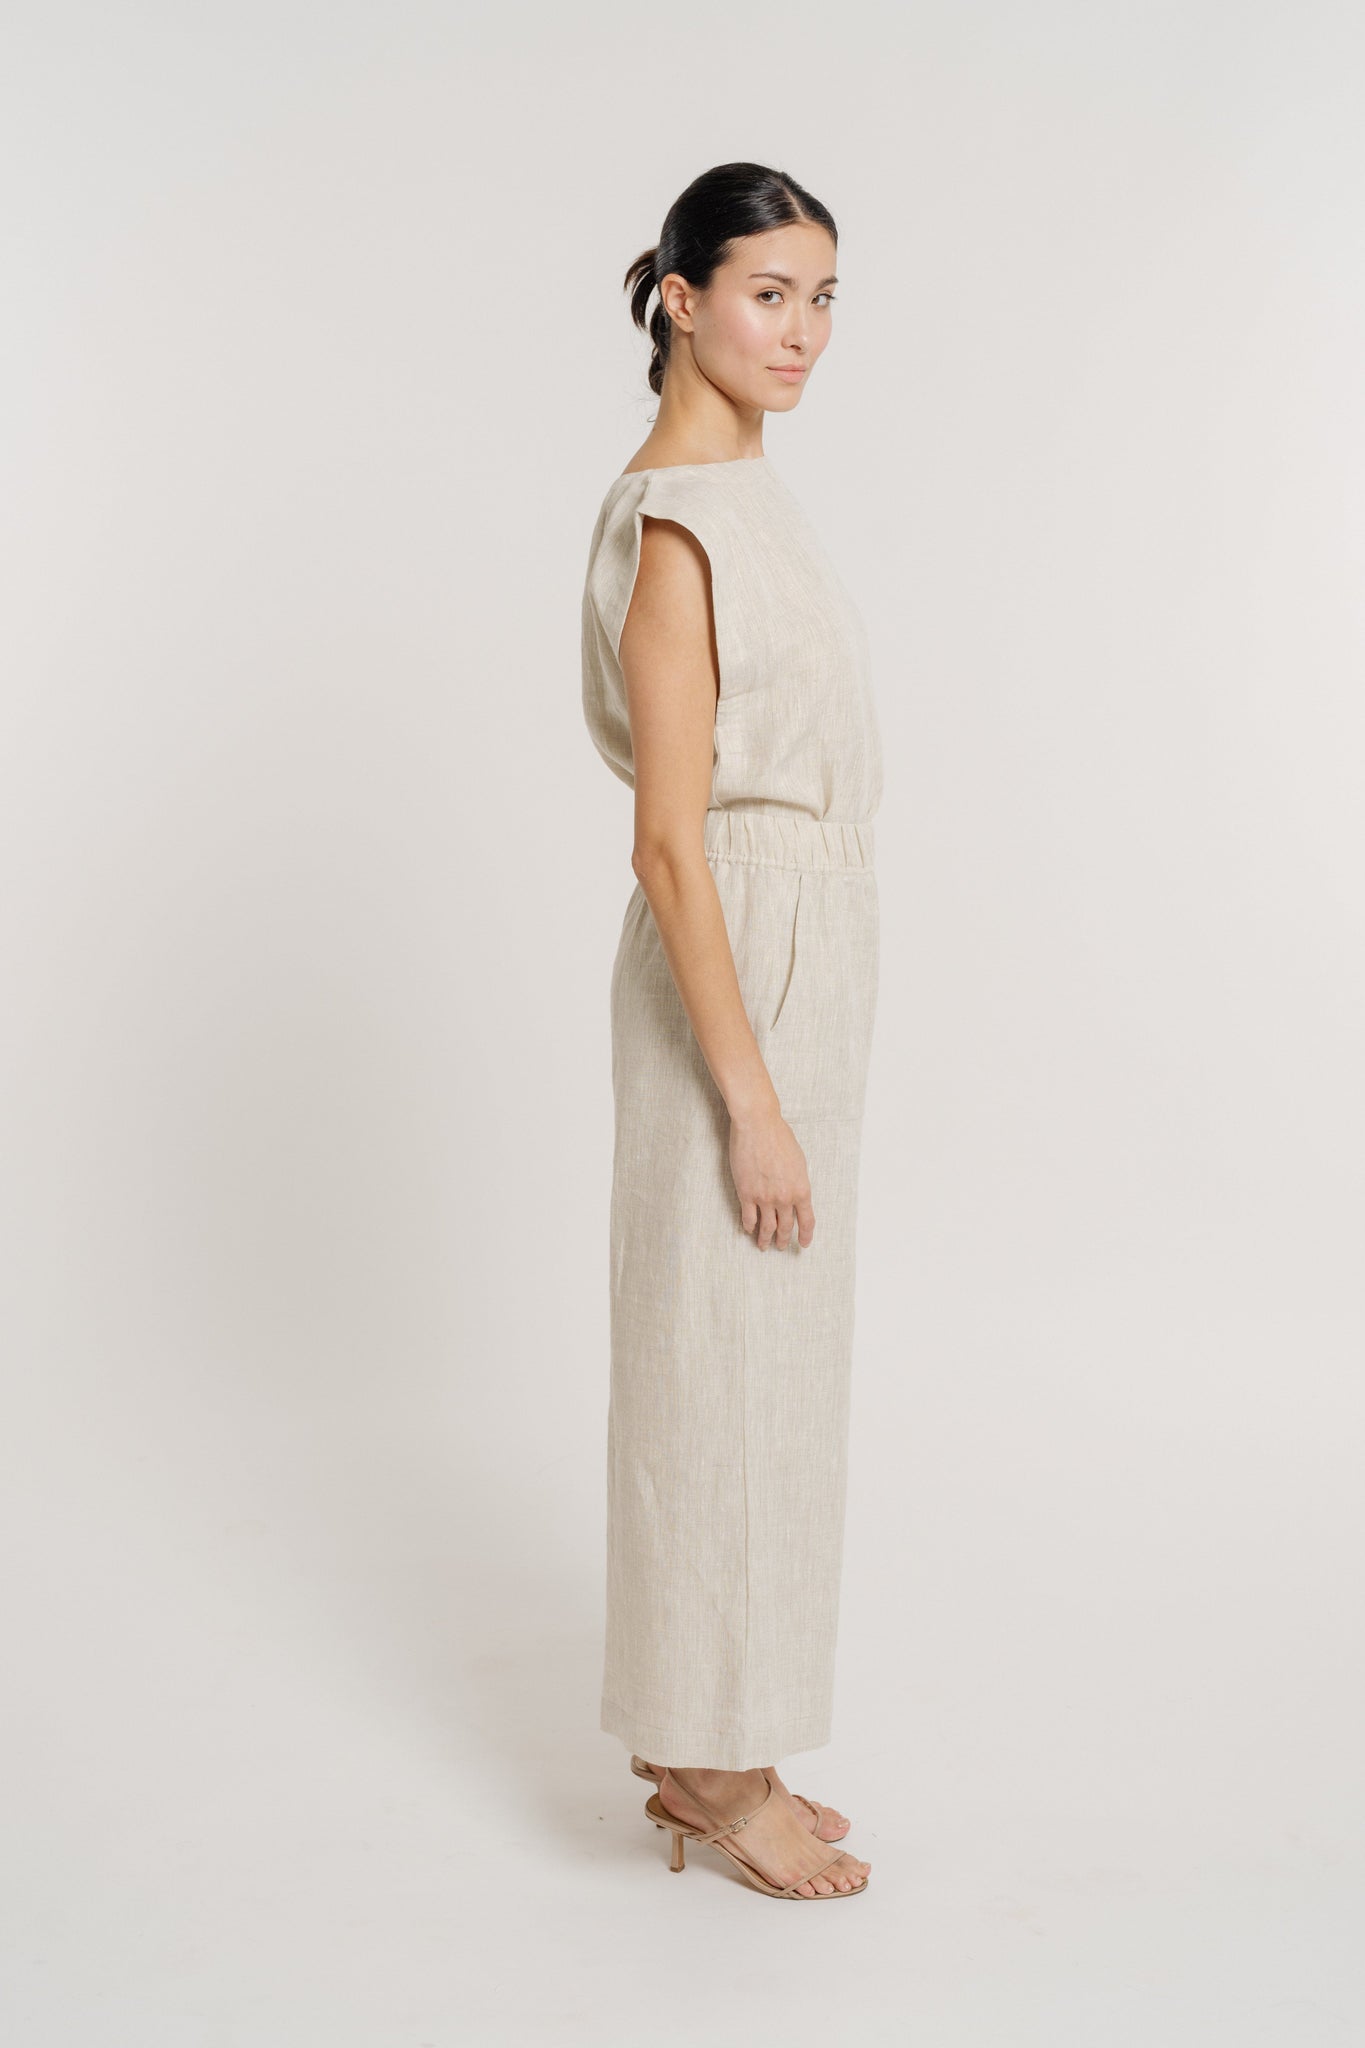 The model is wearing a beige Everyday Pant - Natural Linen made of organic linen fabric.